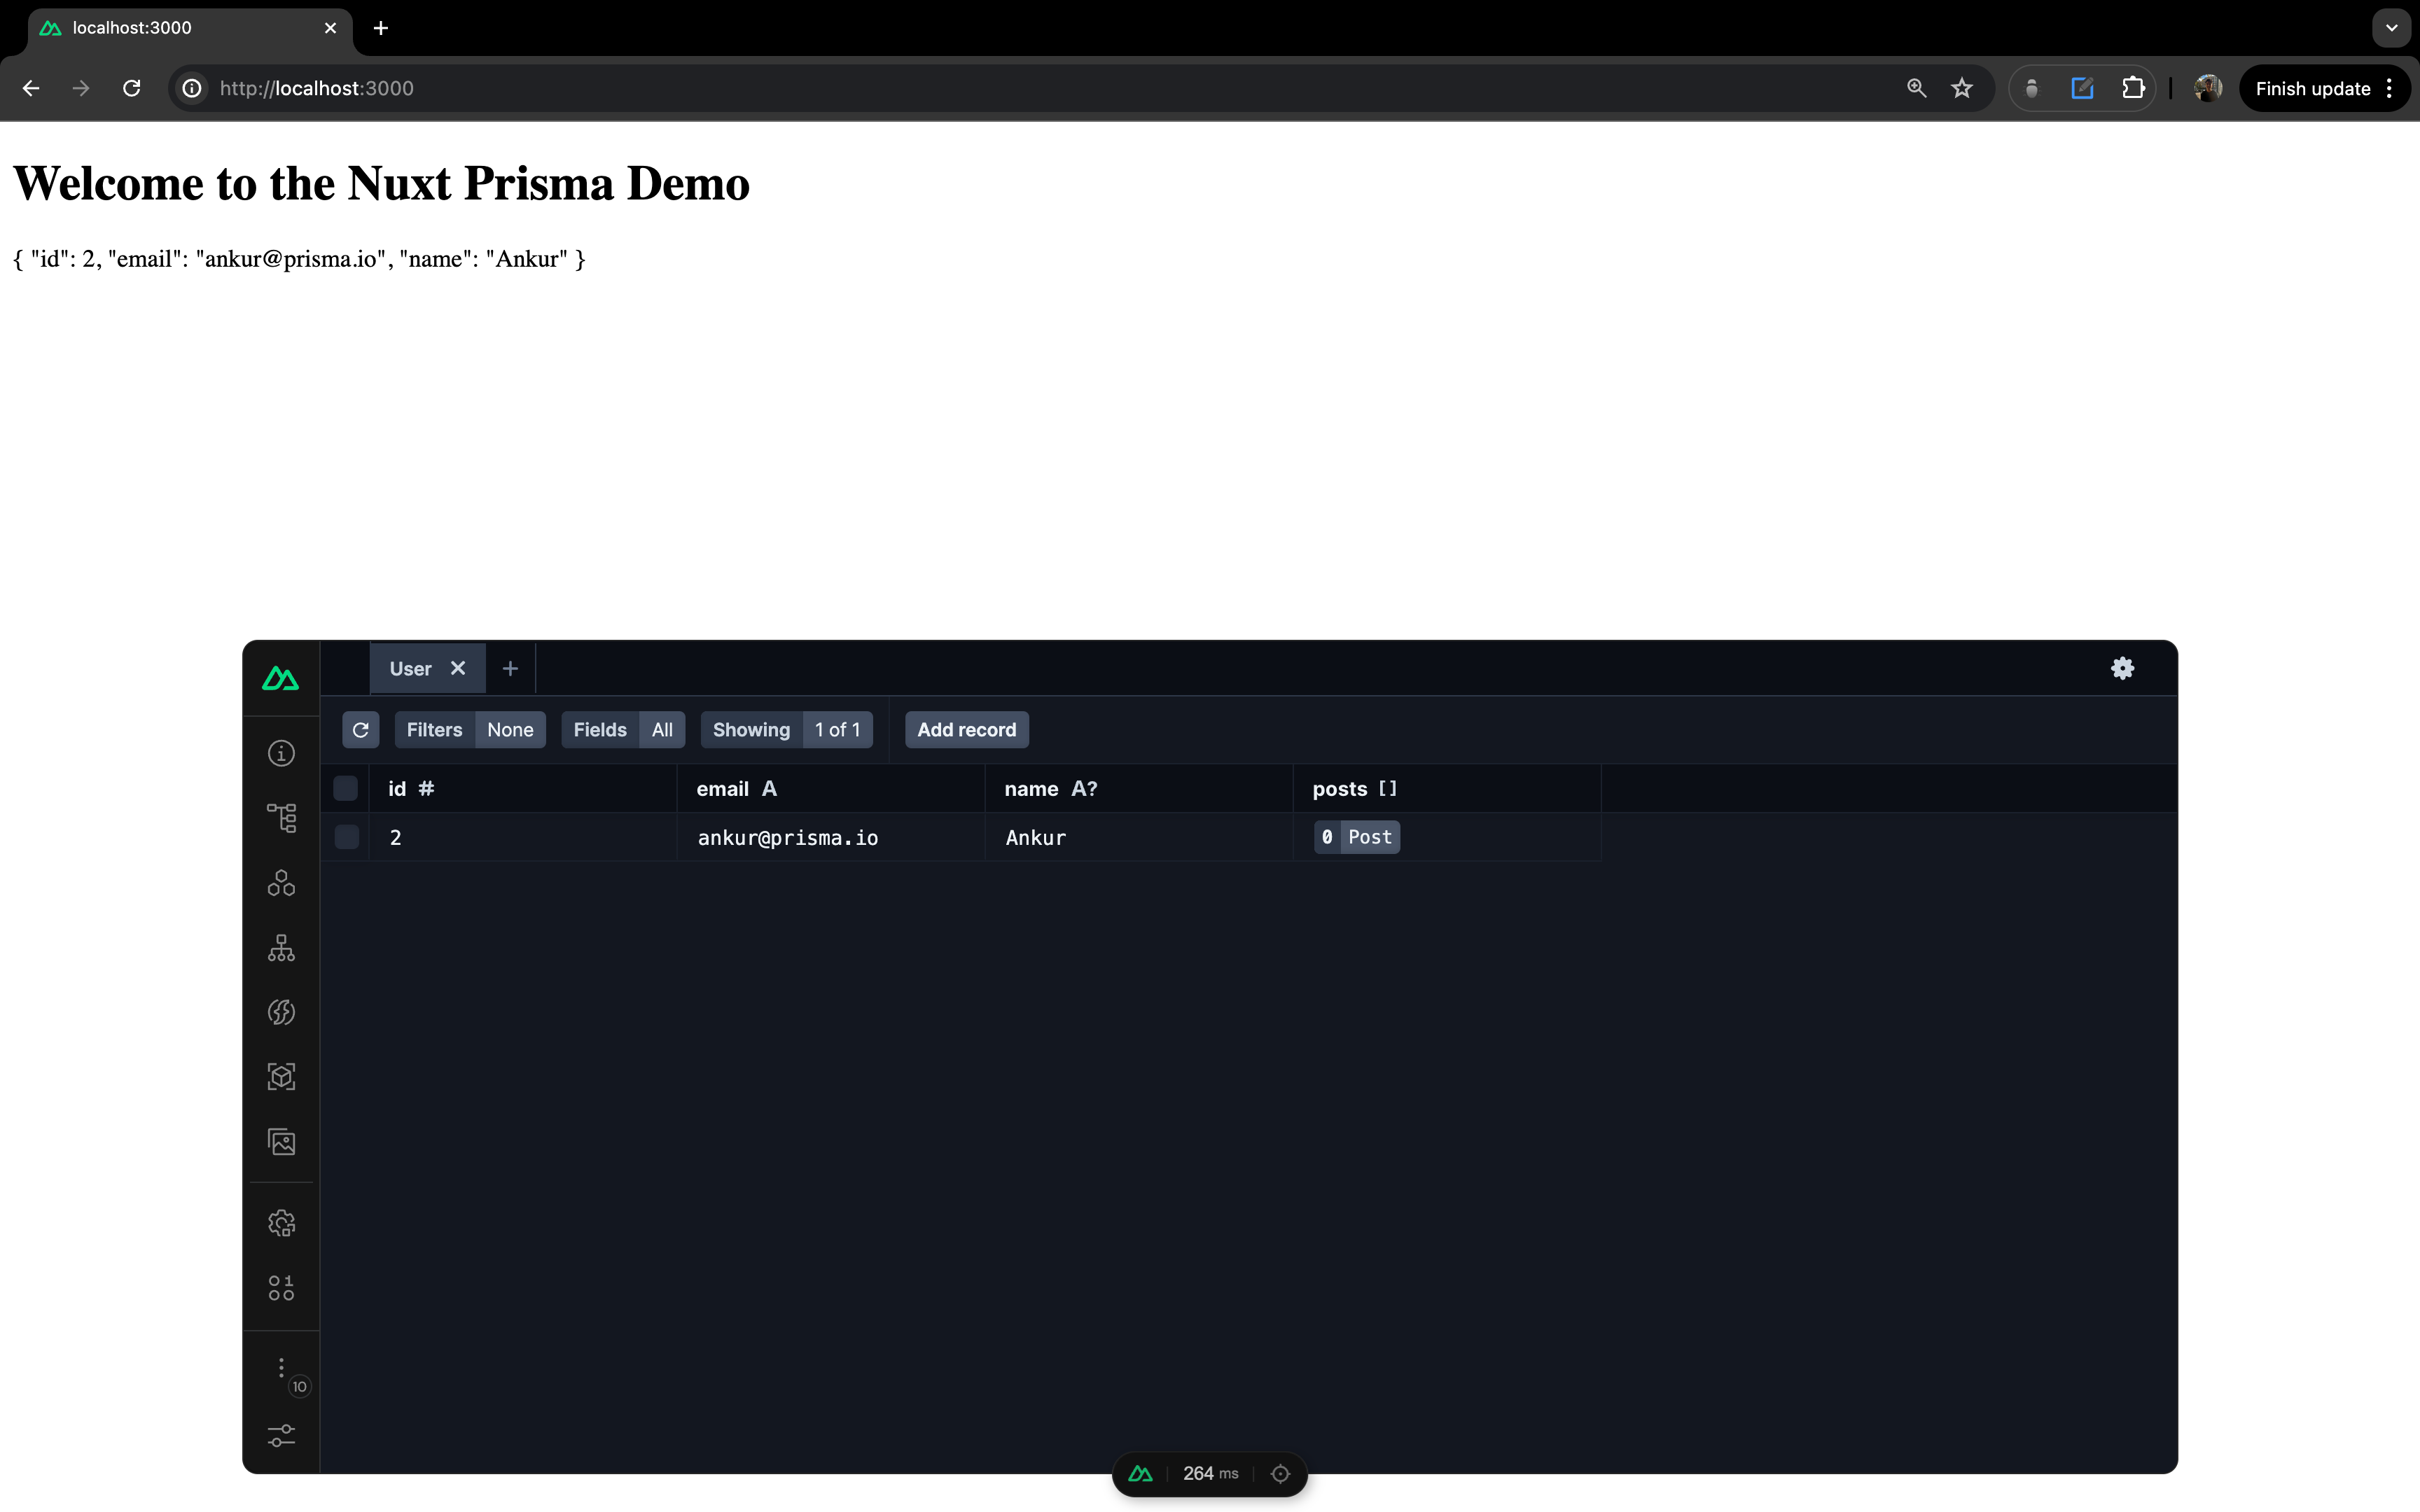 User details being shown on a JSON format while Prisma Studio is still open